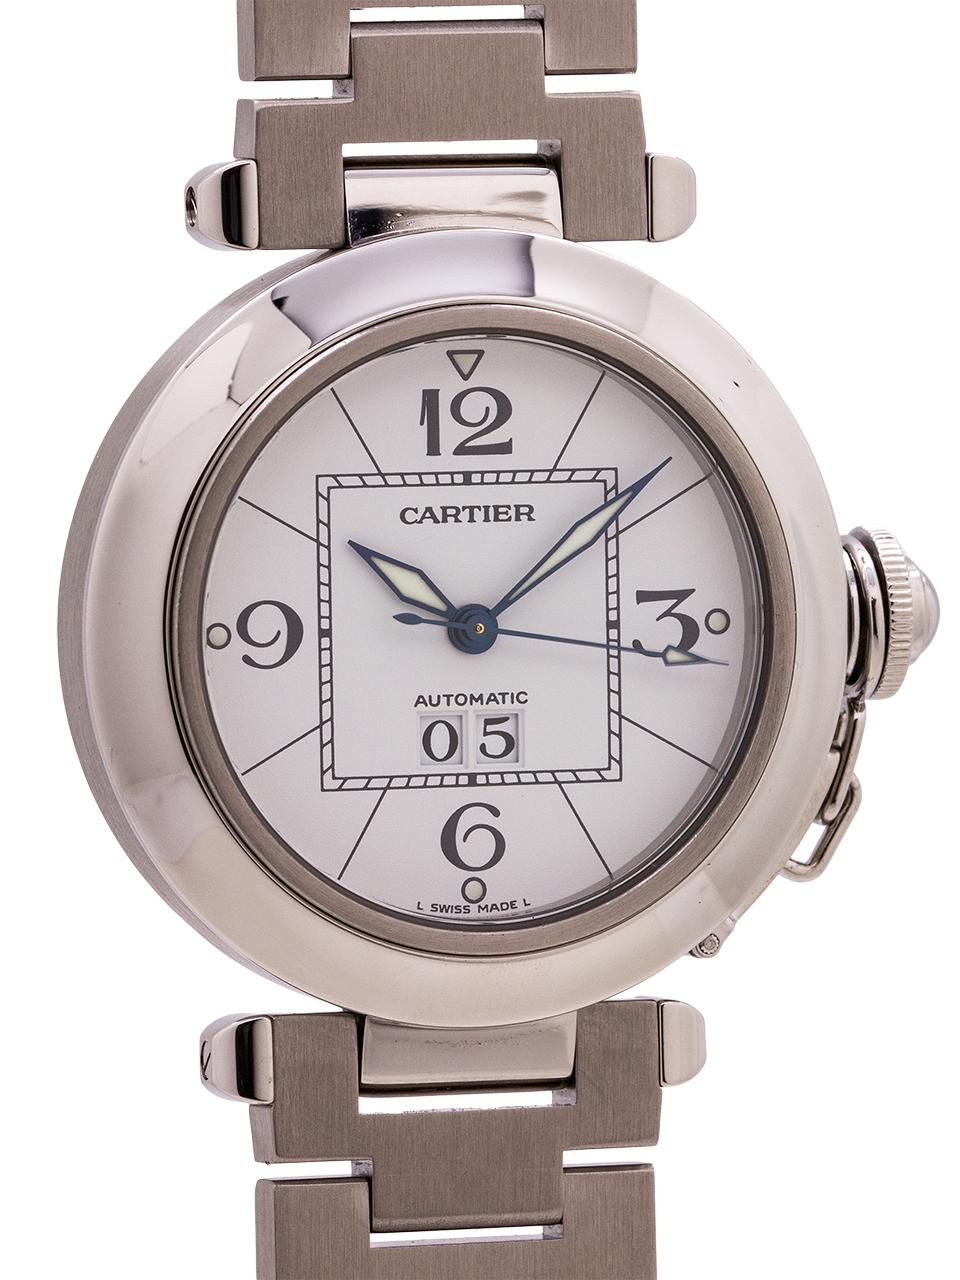 
Cartier stainless steel Pasha C ref 2475 circa 2000s. 35.5 x 42 diameter case with smooth bezel, sapphire crystal and stainless steel screw down canteen style crown protector. Featuring original white dial with large black Arabic numerals and